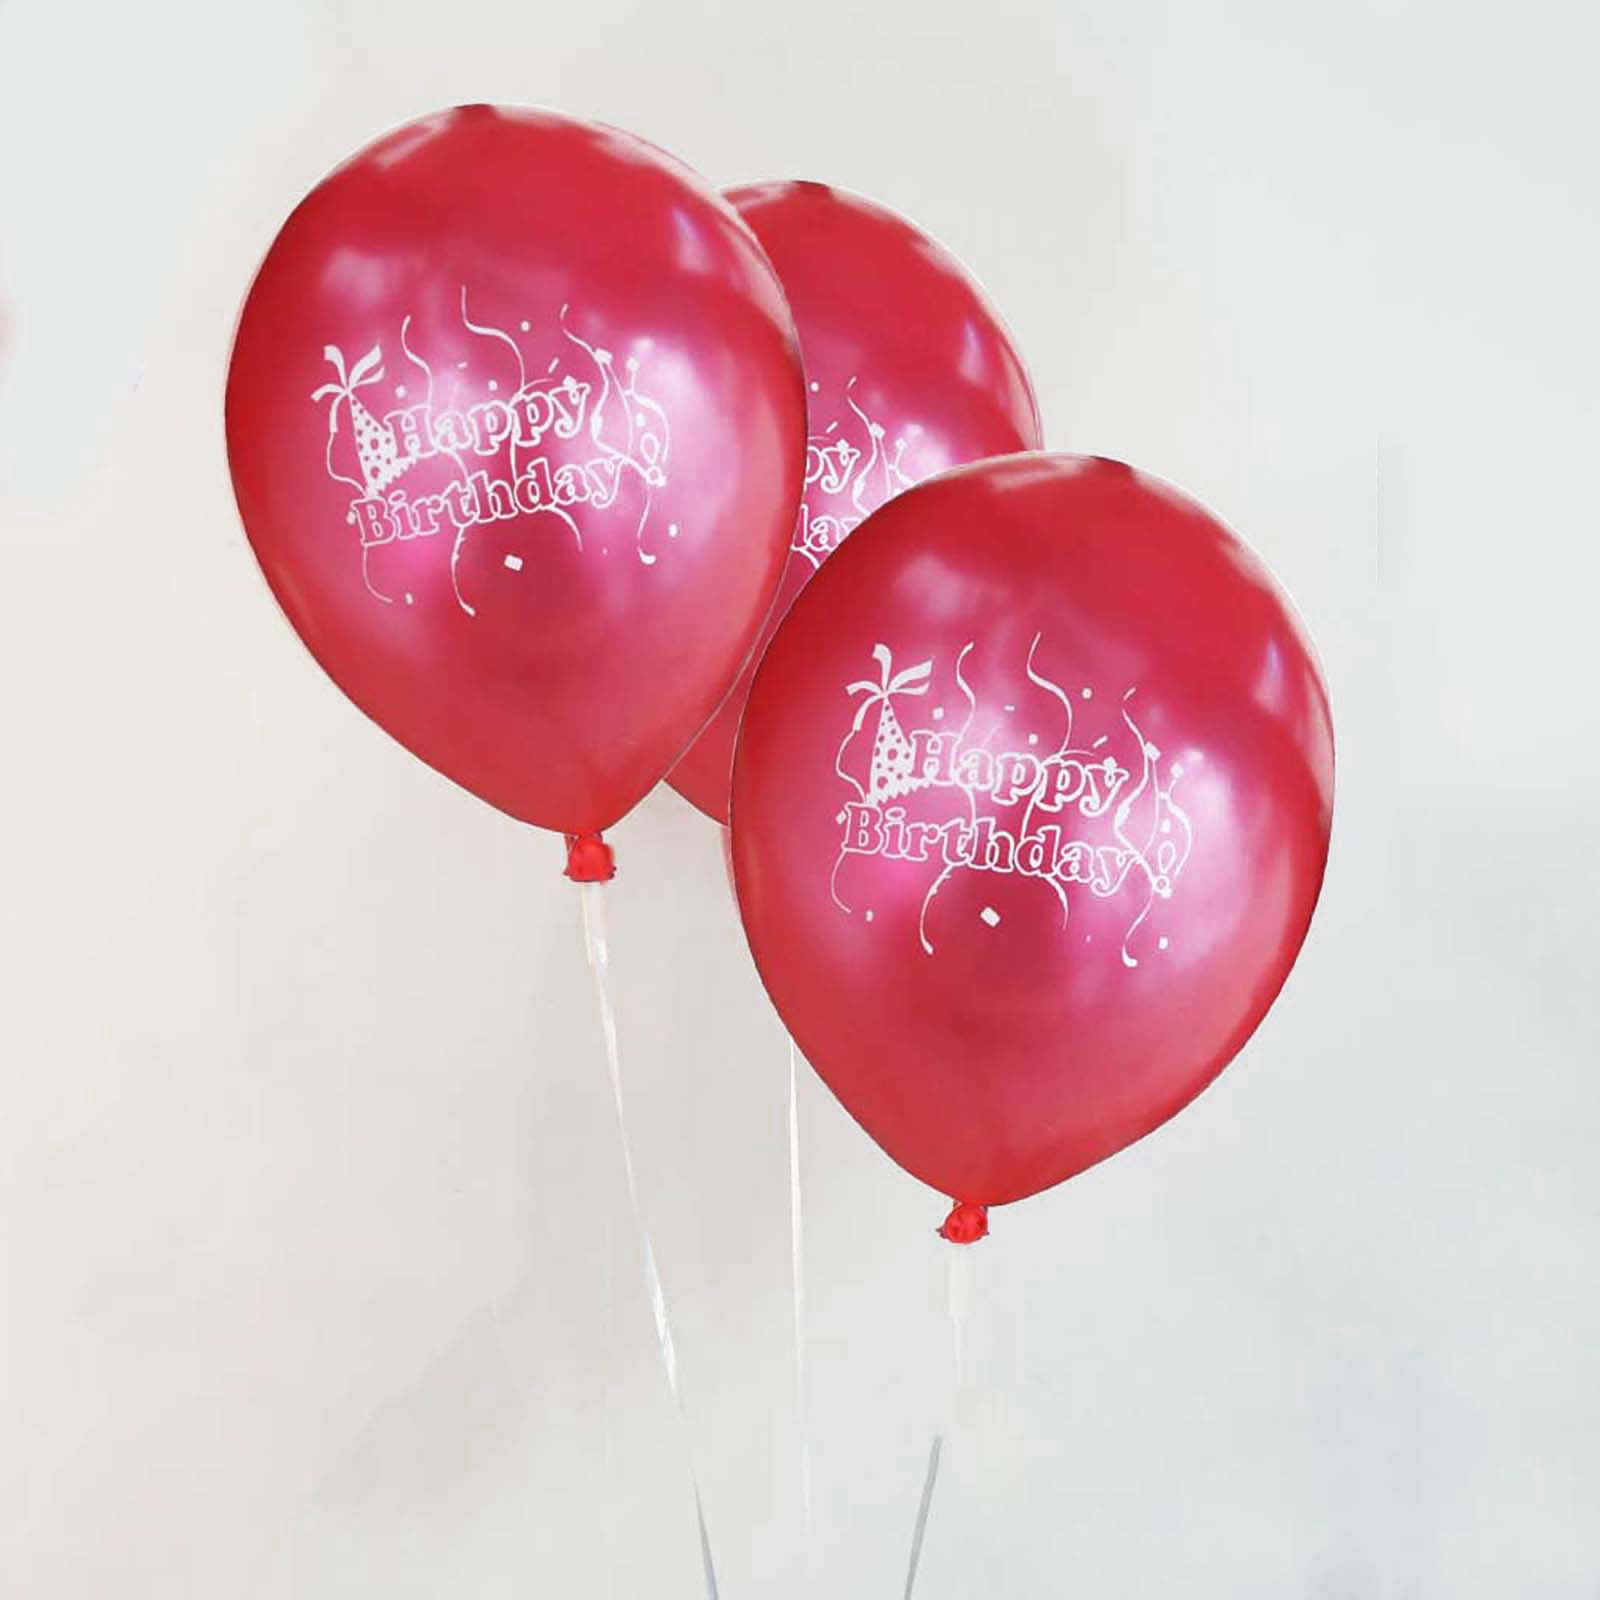 Details about   25pcs 12" Mixed Color "Happy Birthday" Printed Latex Balloons Celebration Party 